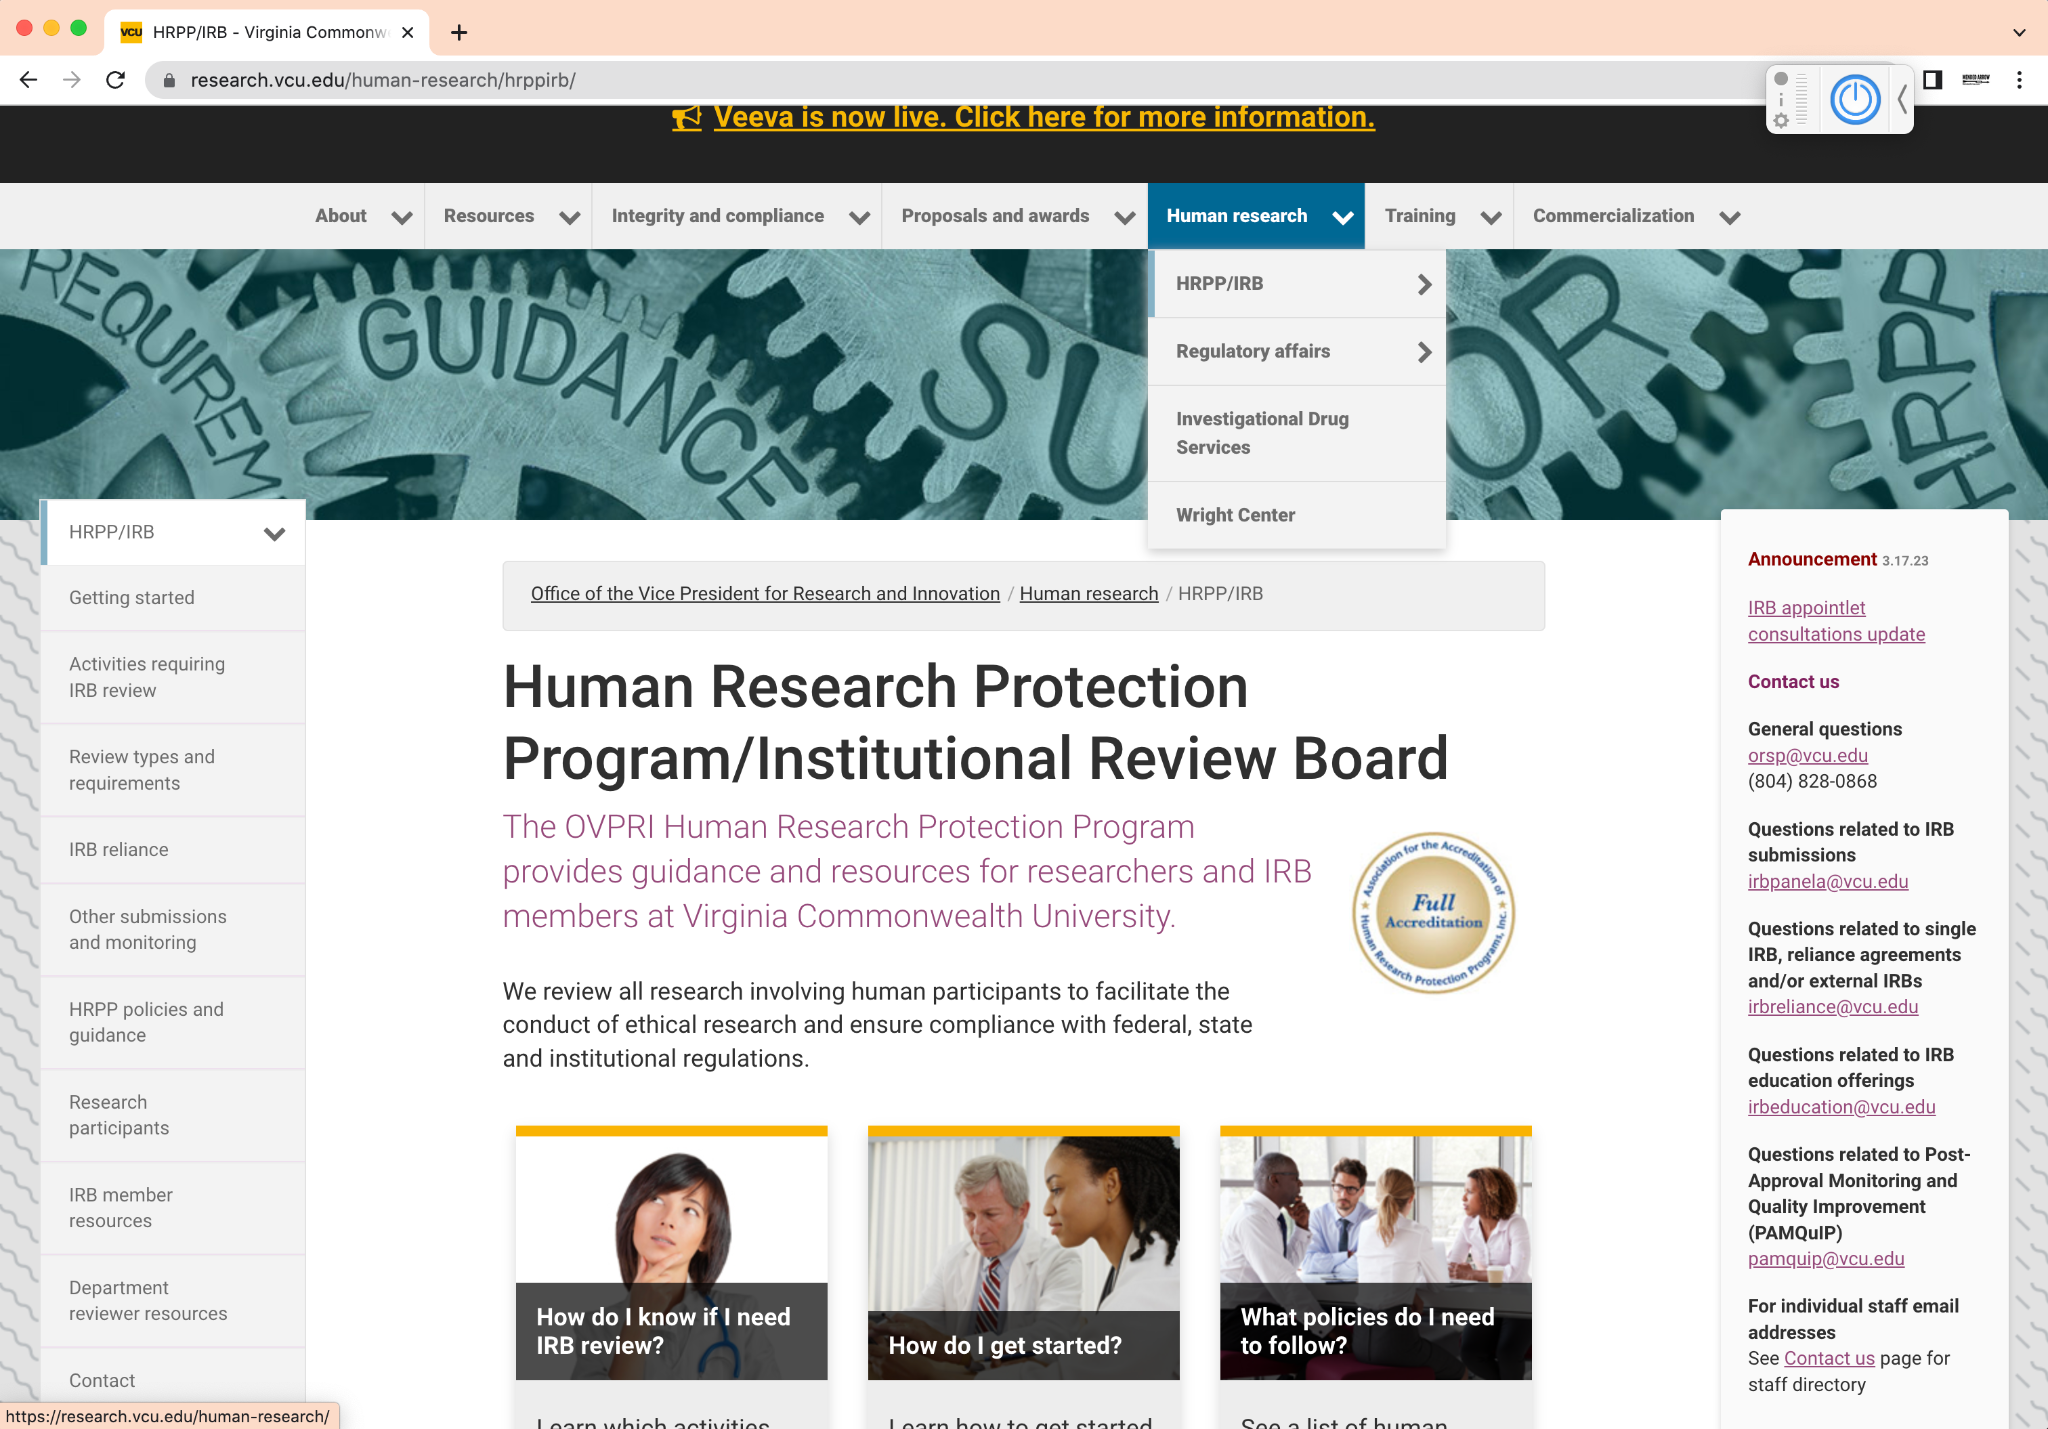 Website for VCU’s Human Research Protection Program/Institutional Review Board.